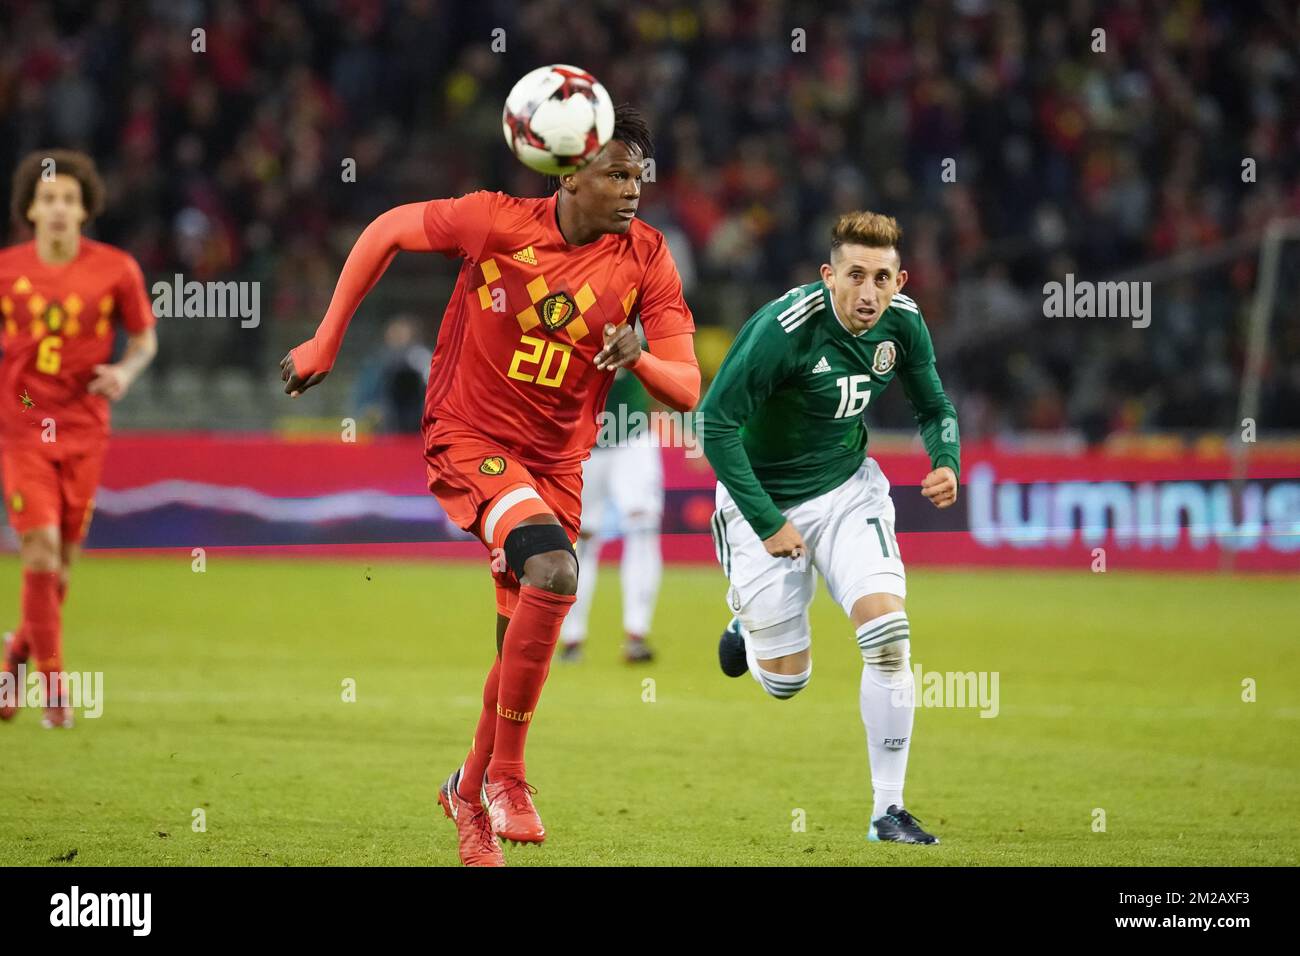 Belgium's Dedryck Boyata and Mexico's Hector Herrera fight for the ball during a friendly soccer game between Belgian national team Red Devils and Mexico, Friday 10 November 2017, in Brugge. BELGA PHOTO BRUNO FAHY Stock Photo